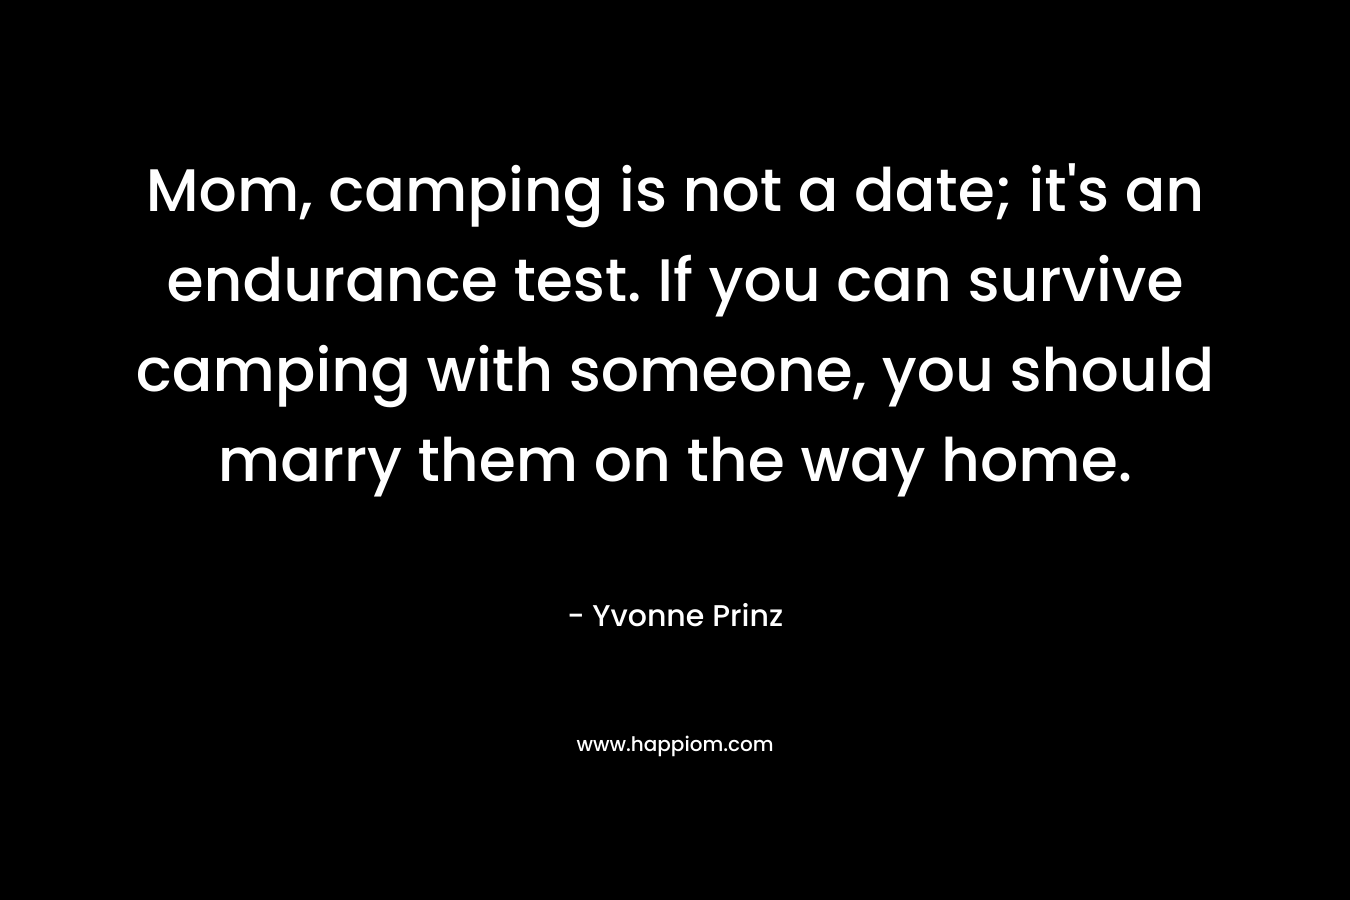 Mom, camping is not a date; it's an endurance test. If you can survive camping with someone, you should marry them on the way home.